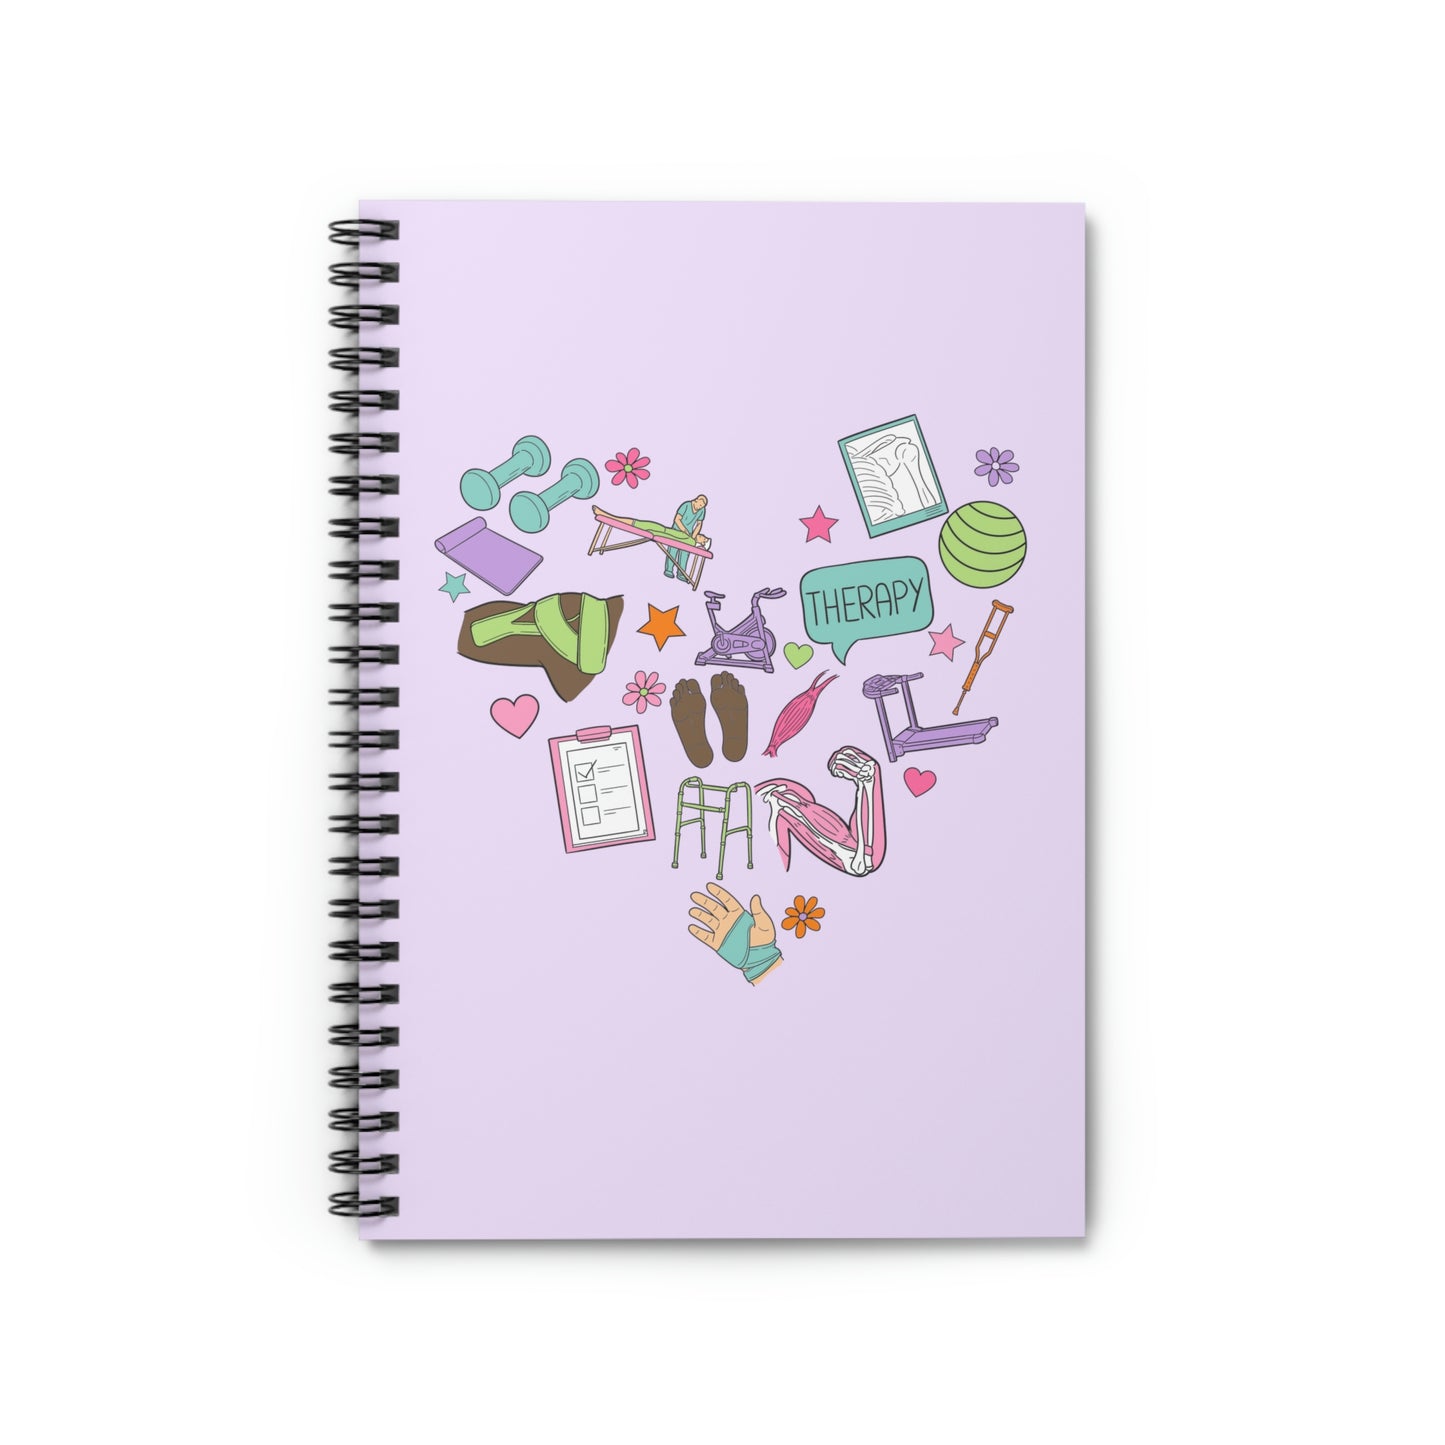 Physical Therapy Essentials Spiral Ruled Line Notebook